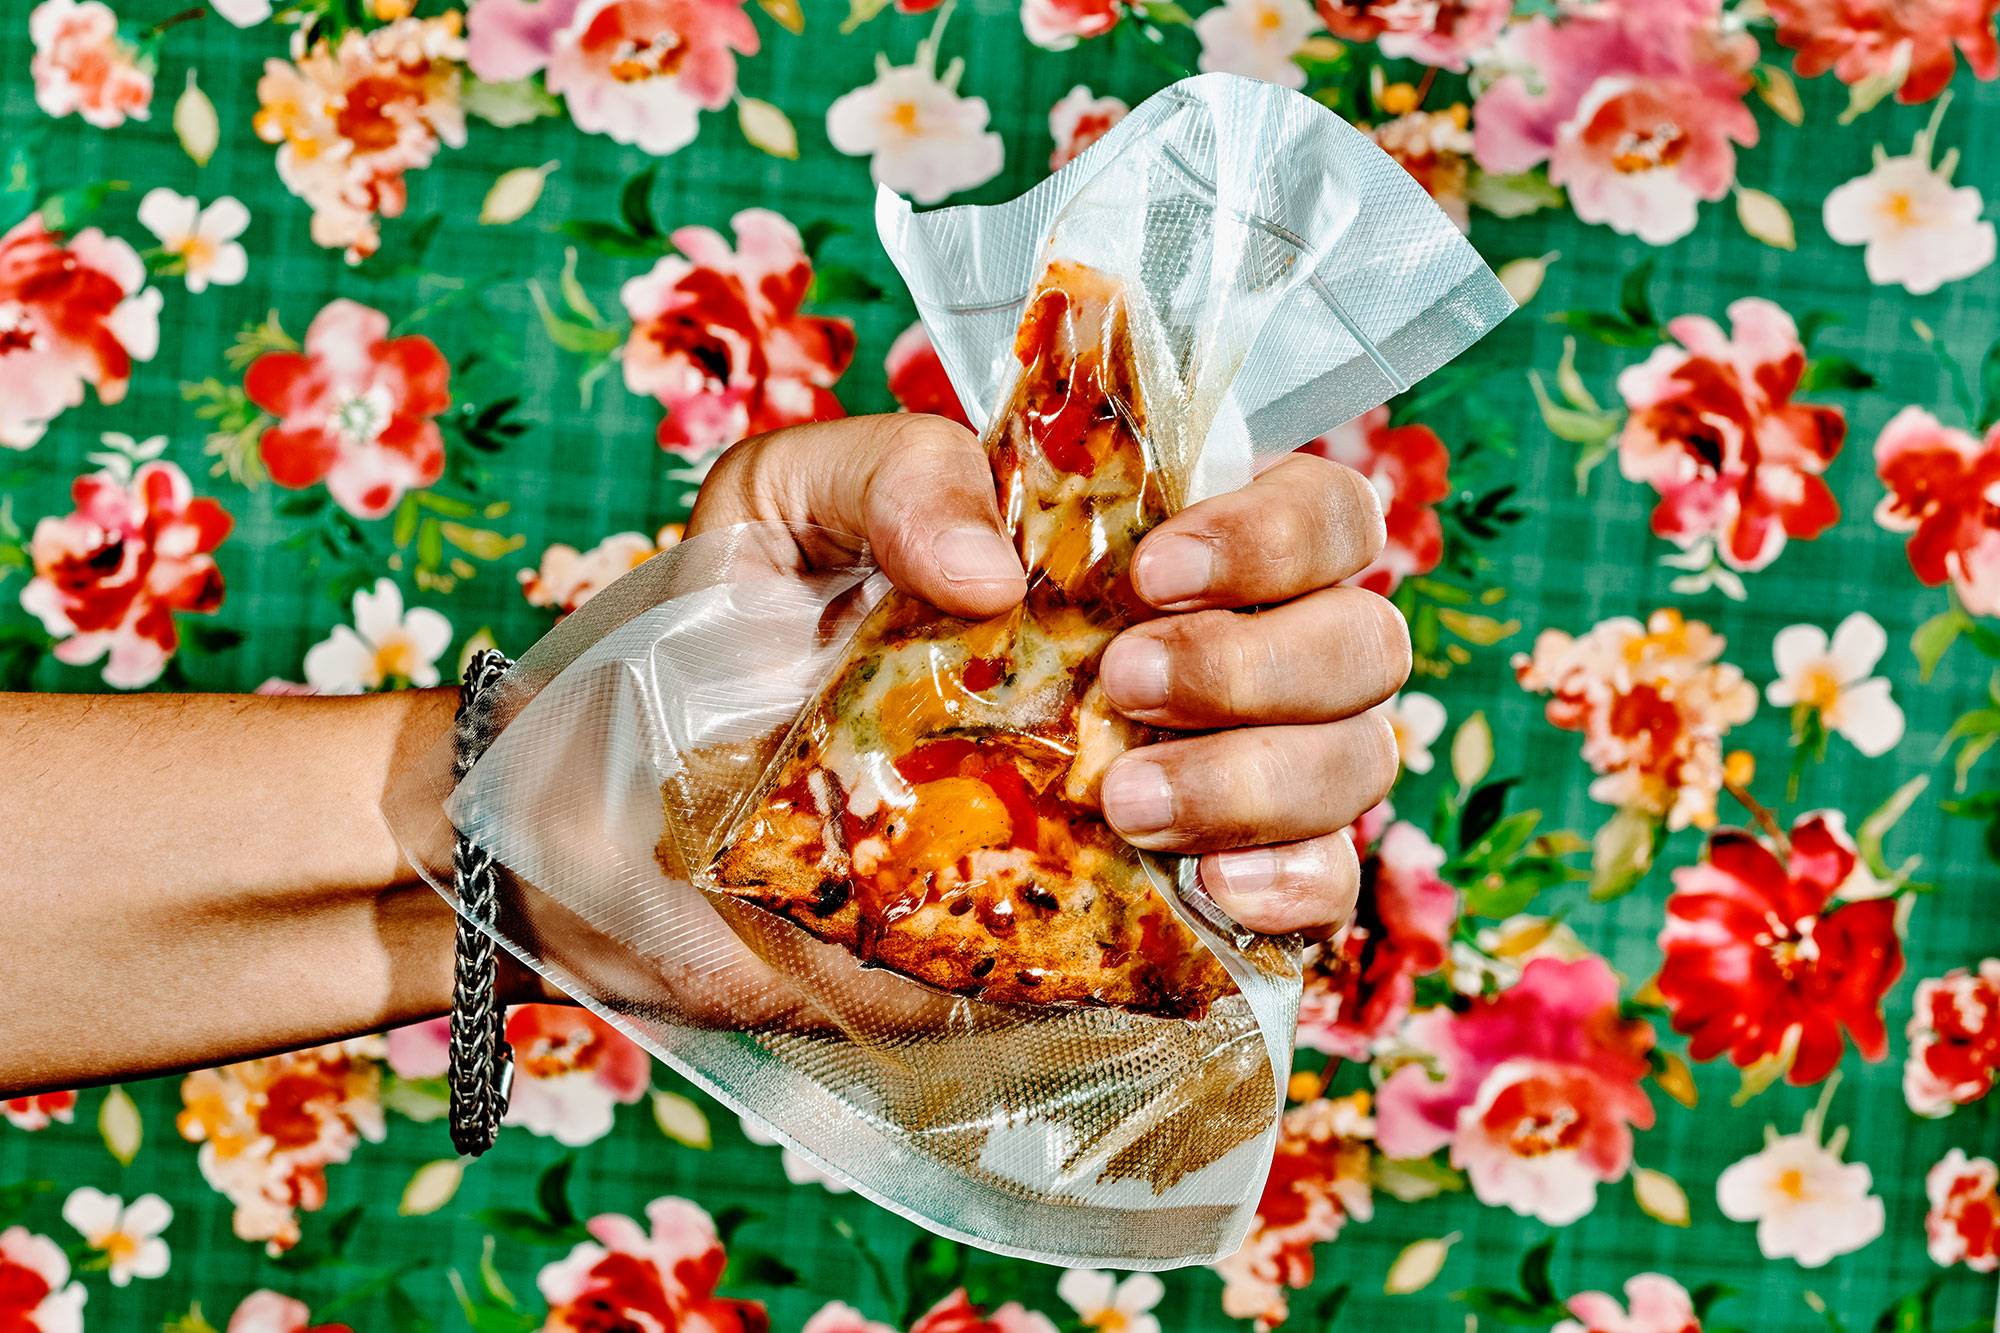 a man is grabbing tightly a vacuum packed slice of vegan pizza, in front of a floral-patterned wallpapered wall